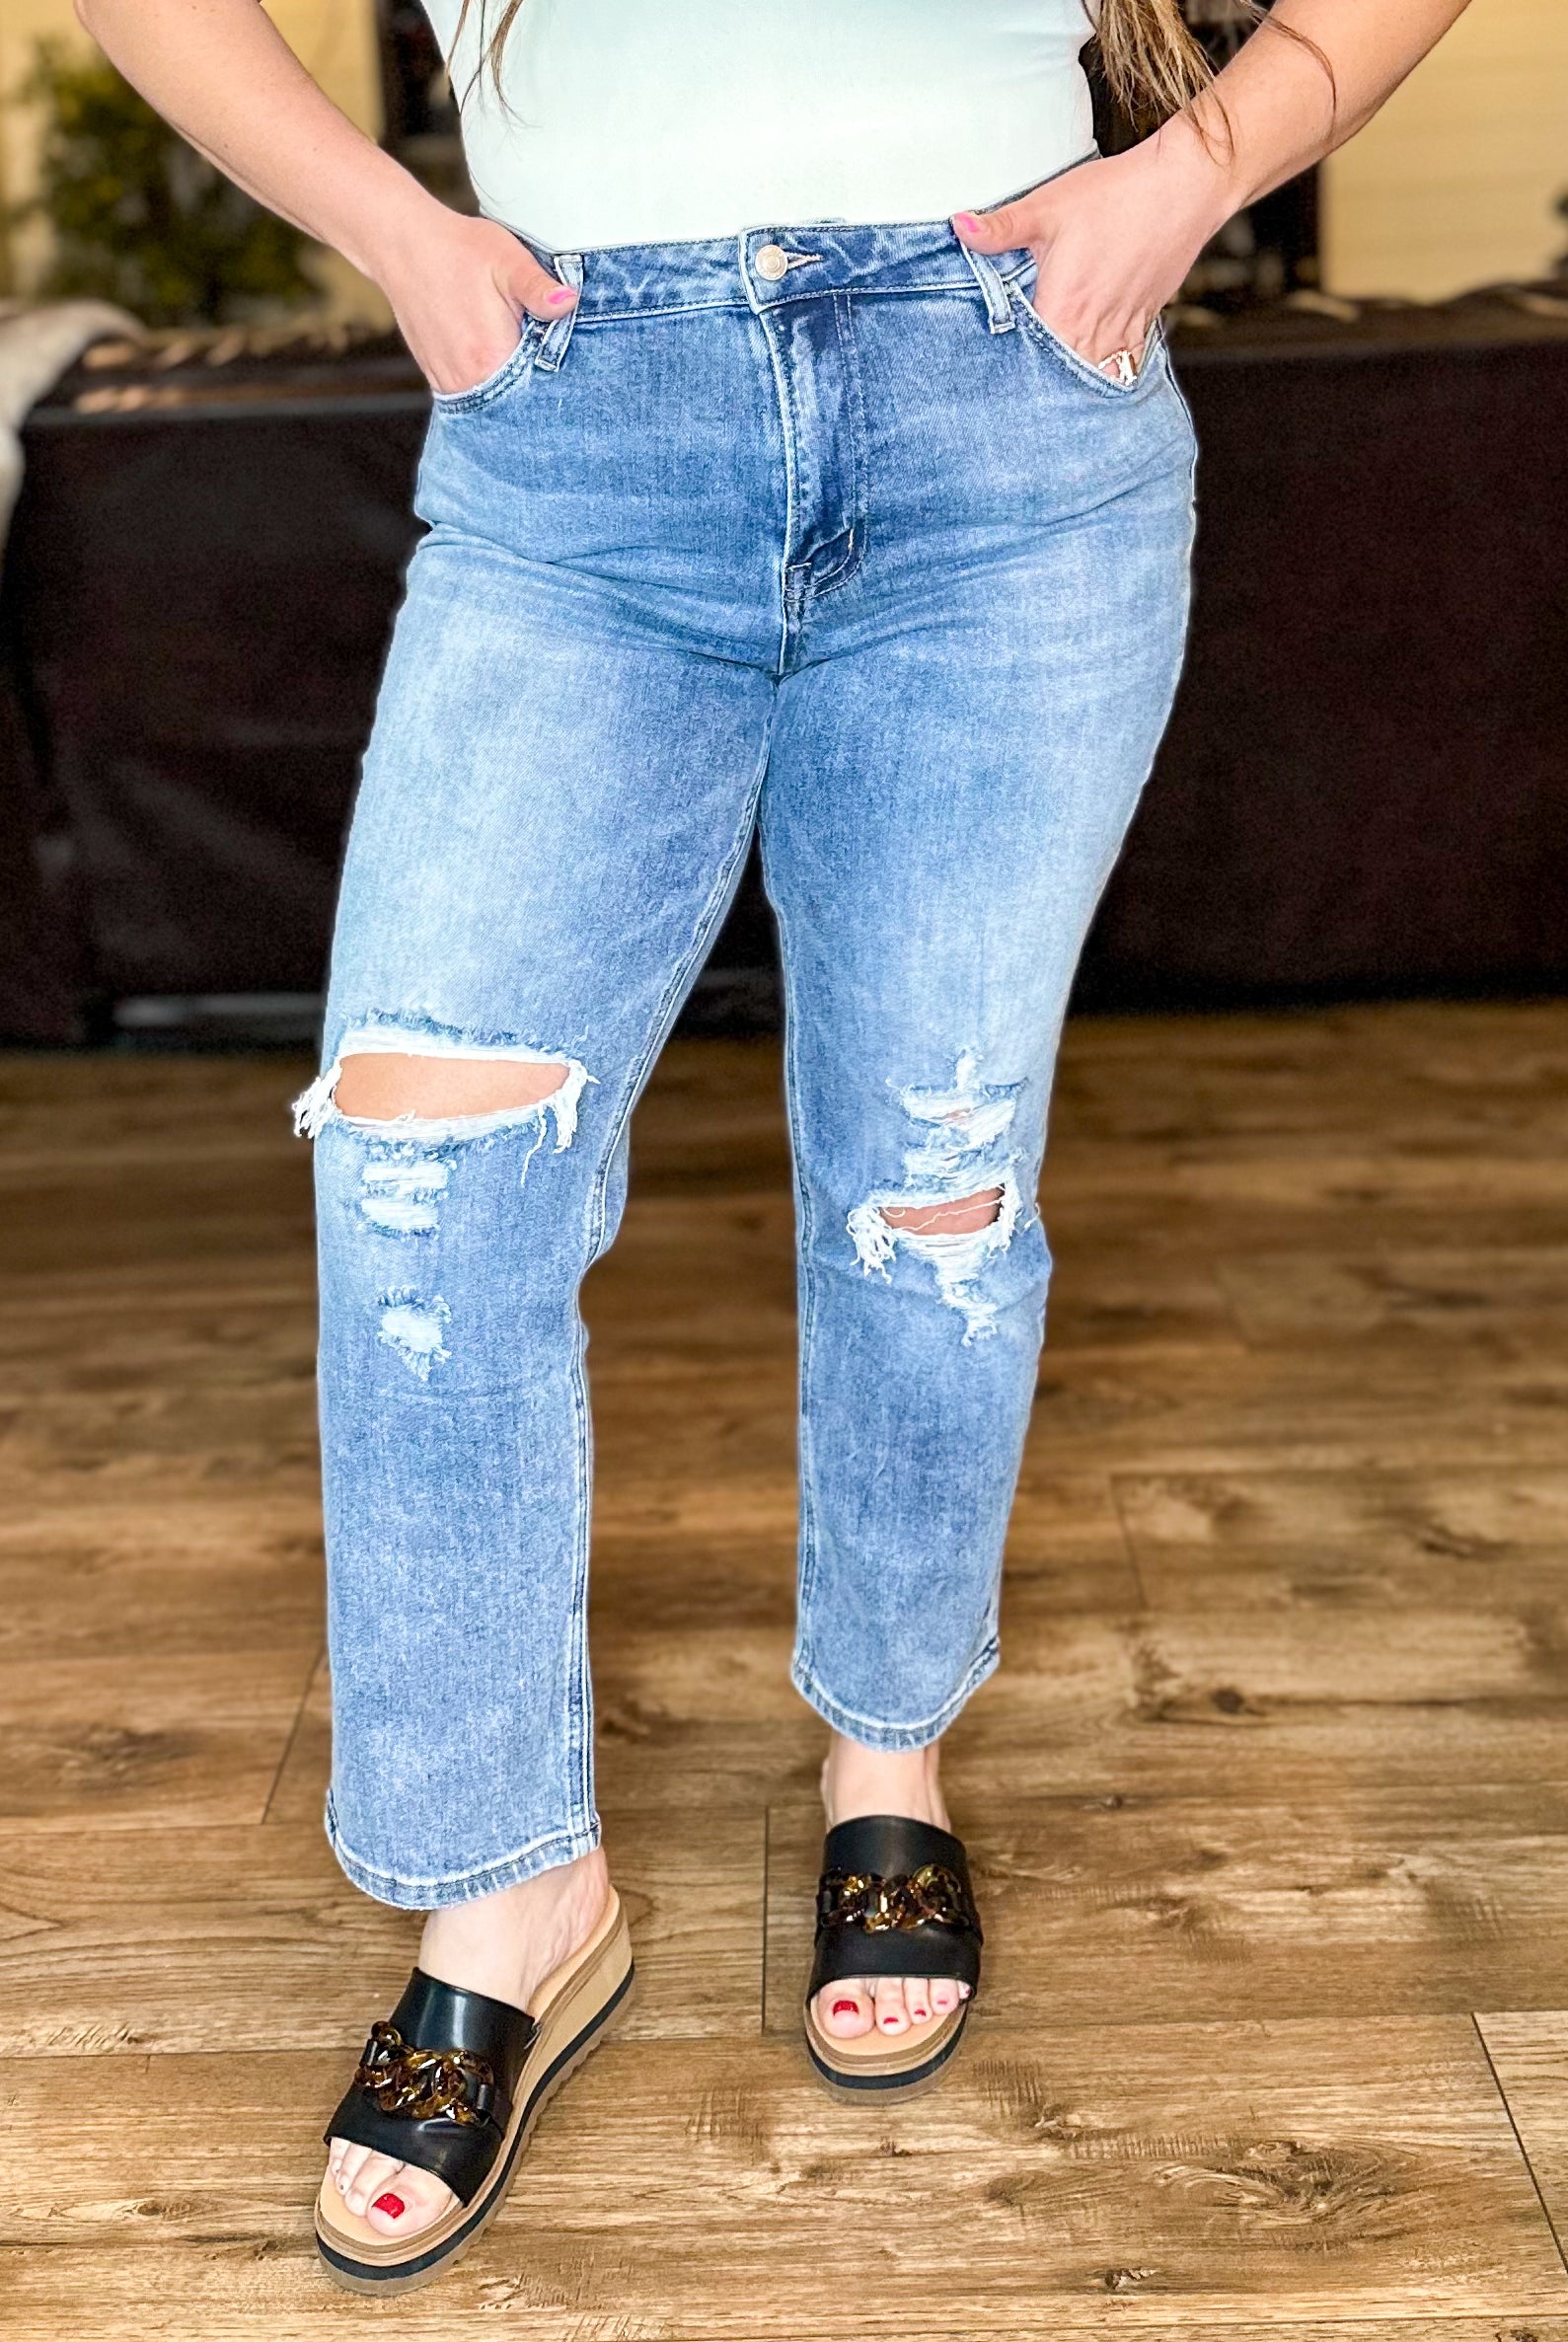 Wild Thing Cropped Straight Leg Jean-190 Jeans-Vervet-Heathered Boho Boutique, Women's Fashion and Accessories in Palmetto, FL